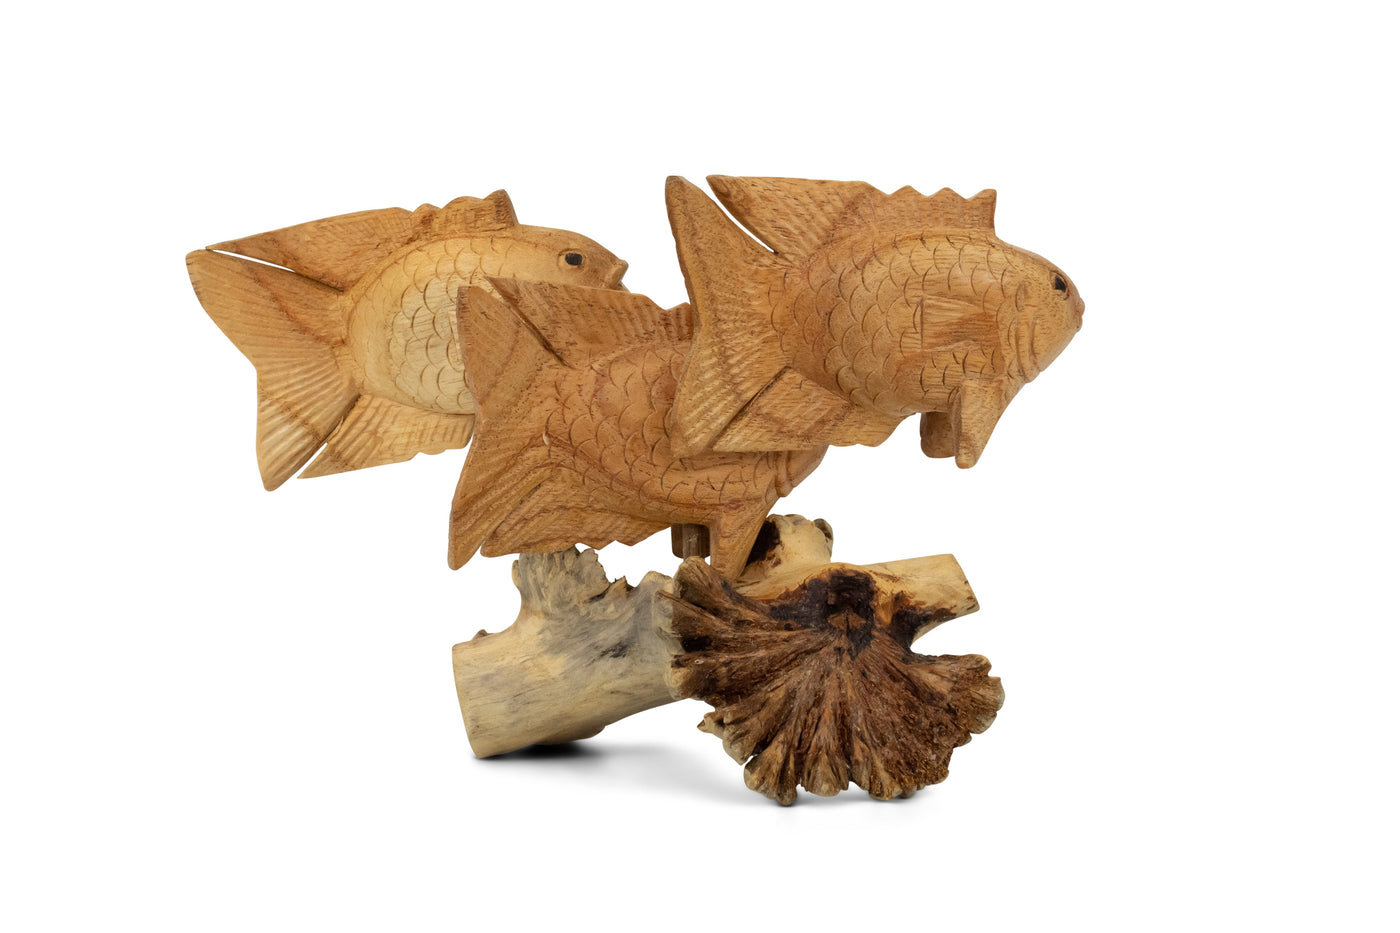 Wooden Hand Carved 3 Fish Swimming Statue Figurine Sculpture Art Home Decor Accent Handmade Gift Handcrafted Seaside Tropical Nautical Ocean Coastal